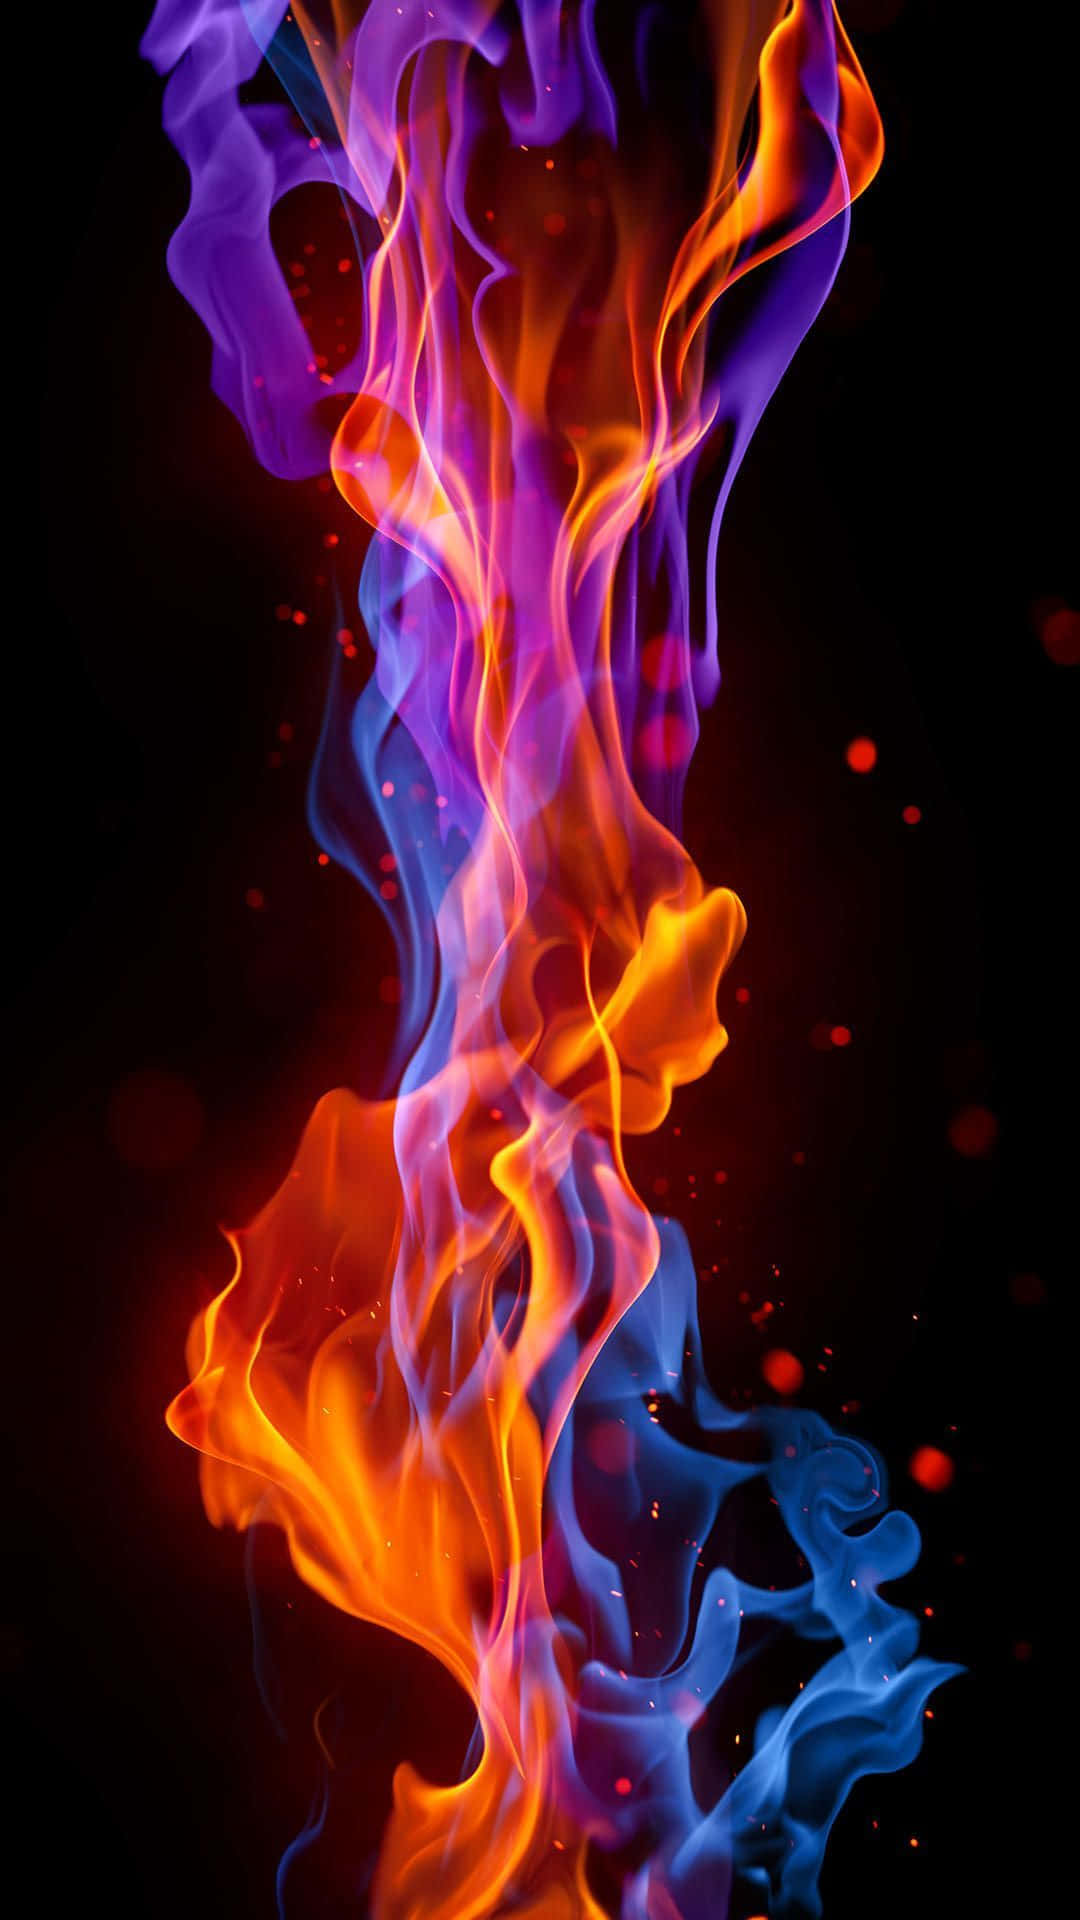 Intense Fire Flames on a Black Background